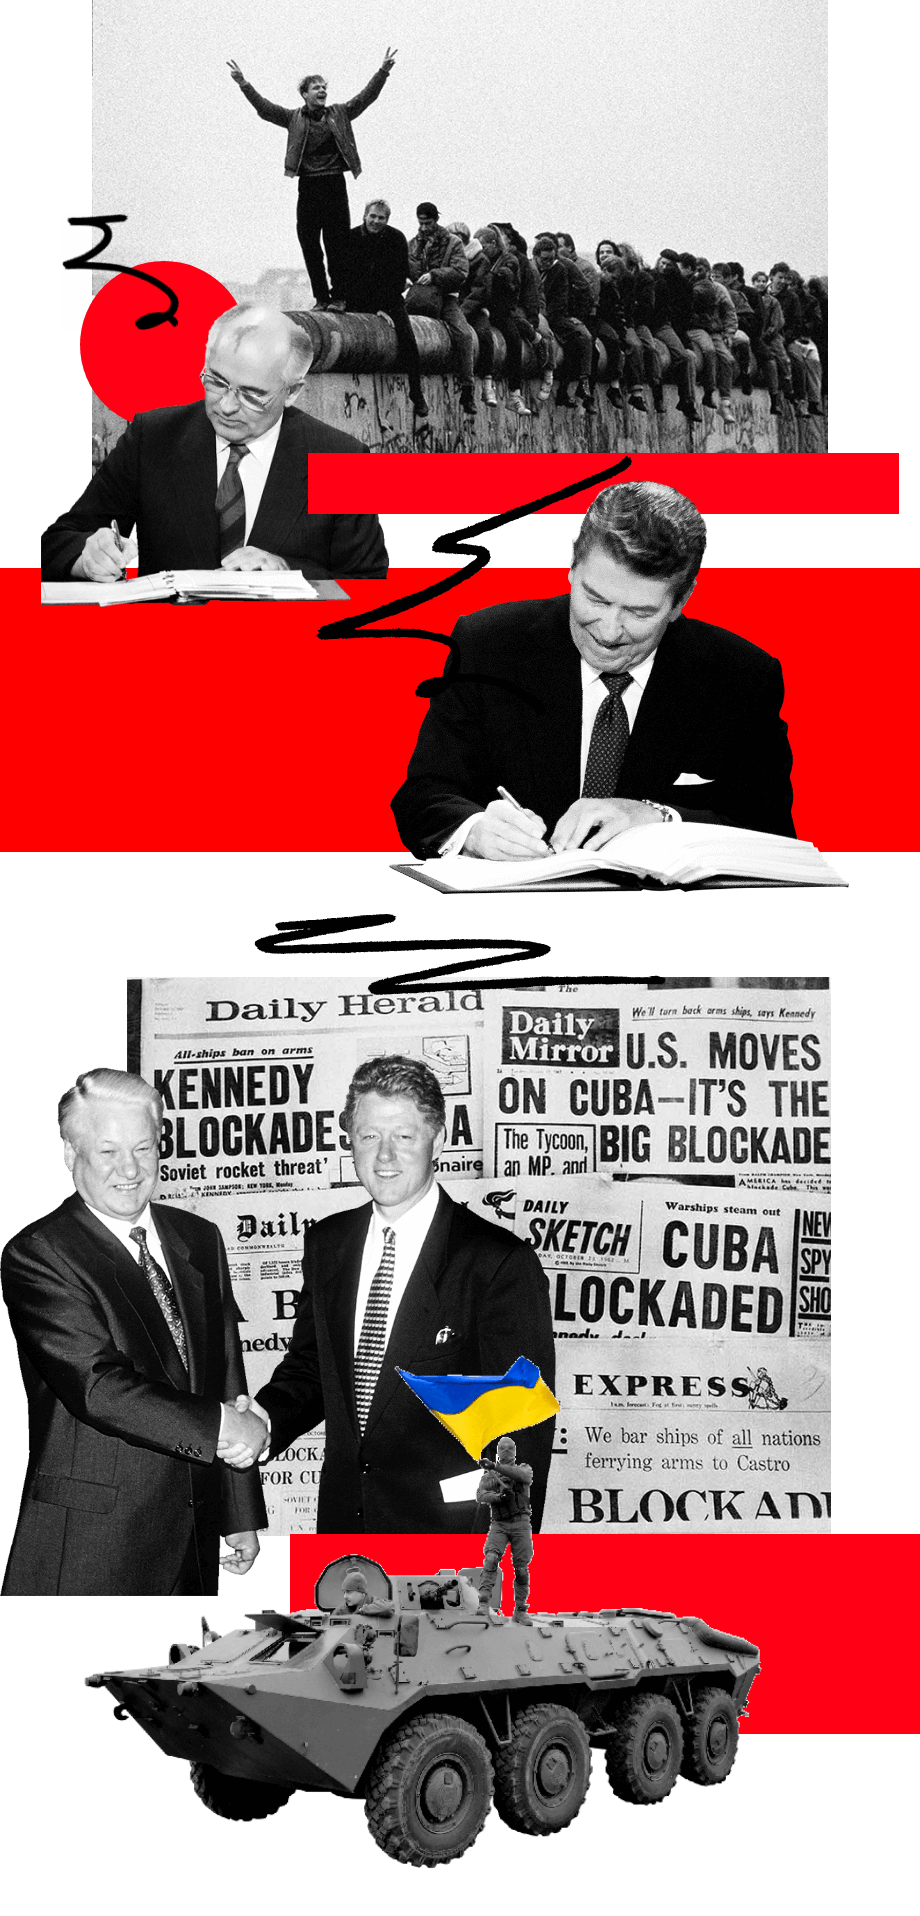 Composite image of the Berlin Wall, Mikhail Gorbachev, Ronald Reagan, front pages of the Cuban crisis newspaper, Boris Yeltsin and Bill Clinton shaking hands and a Ukrainian tank